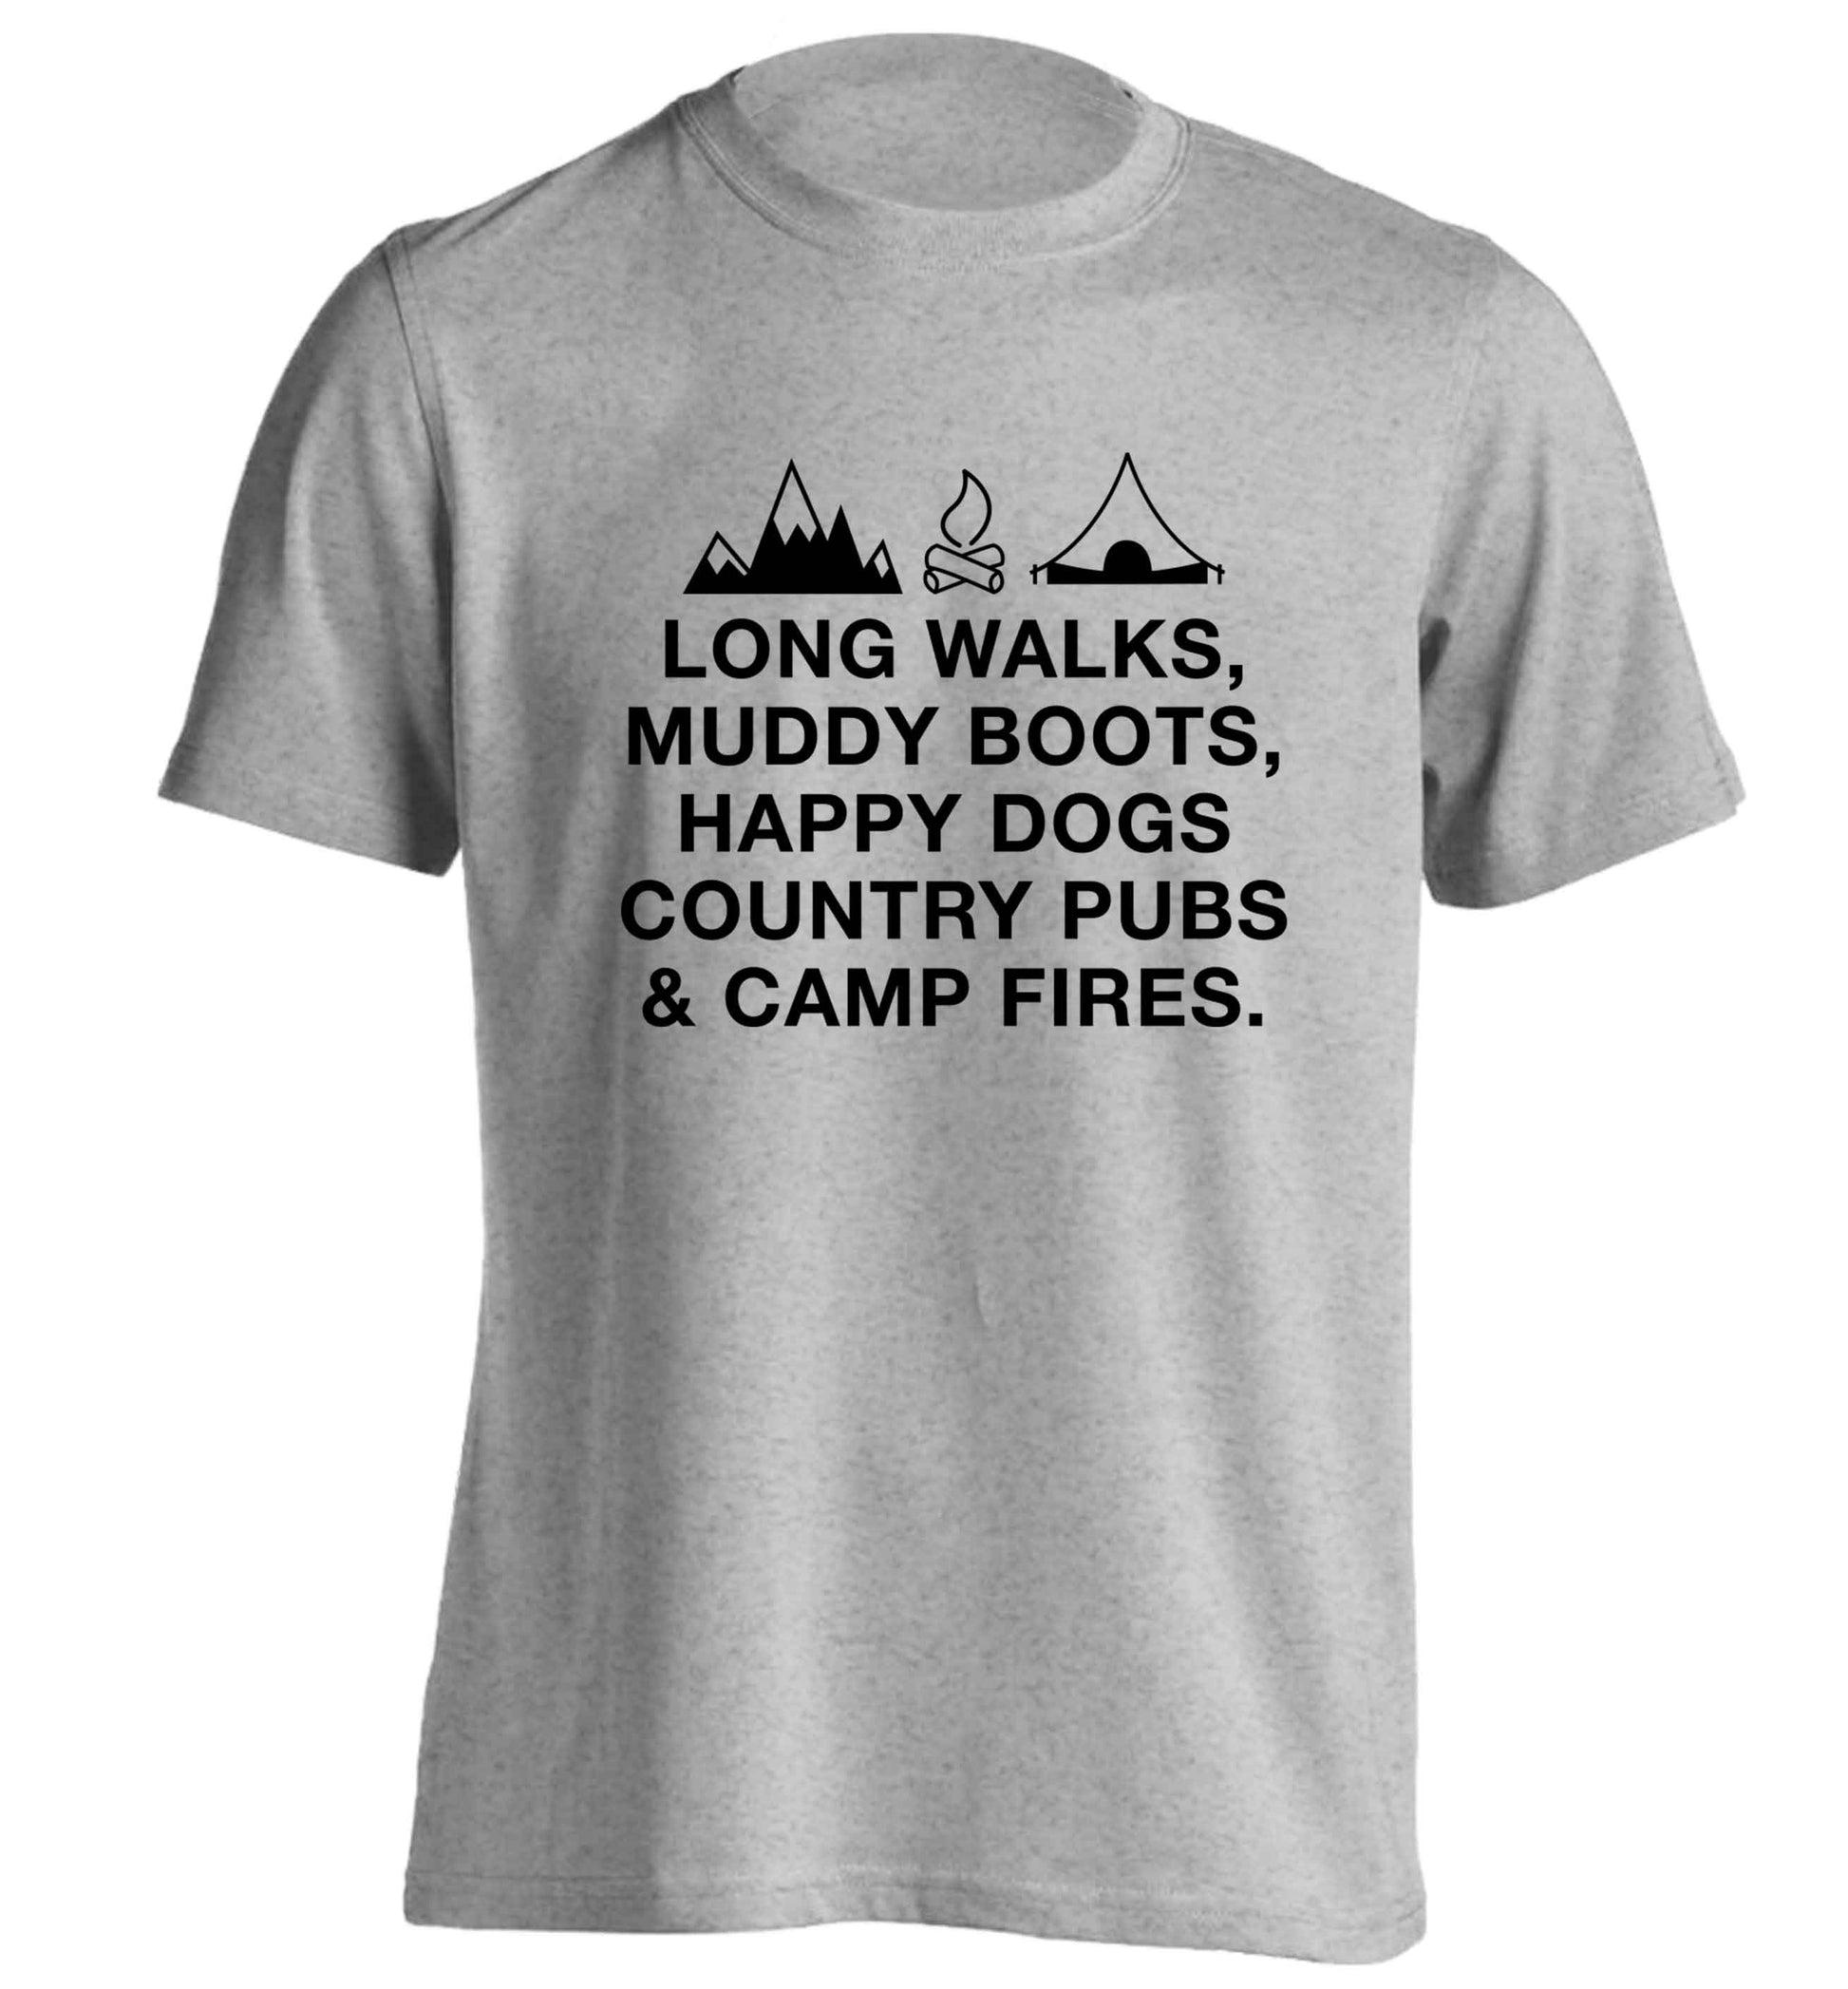 Long walks muddy boots happy dogs country pubs and camp fires adults unisex grey Tshirt 2XL